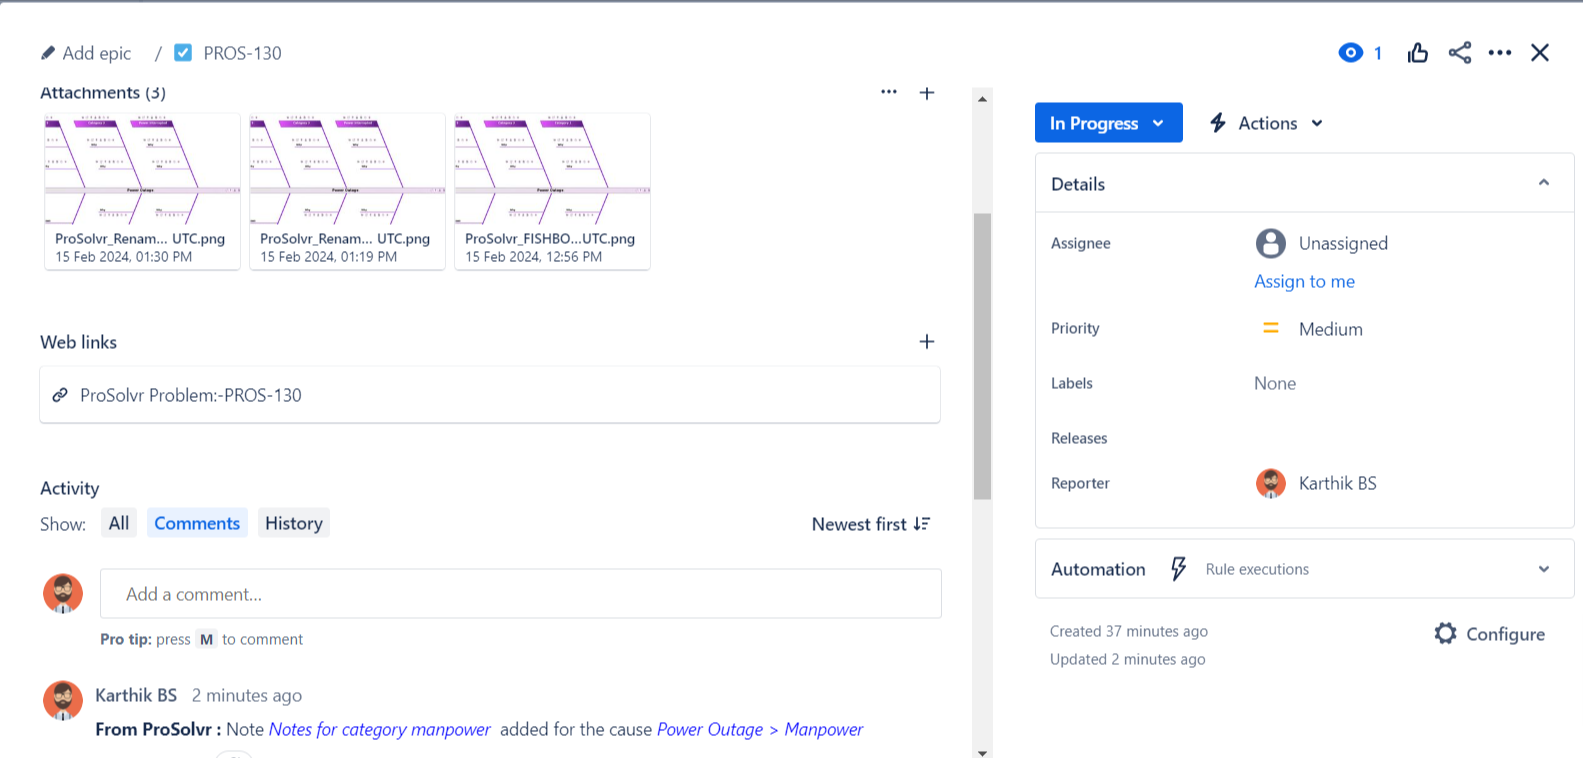 Details of the note addition operation can be found in the associated Jira issue